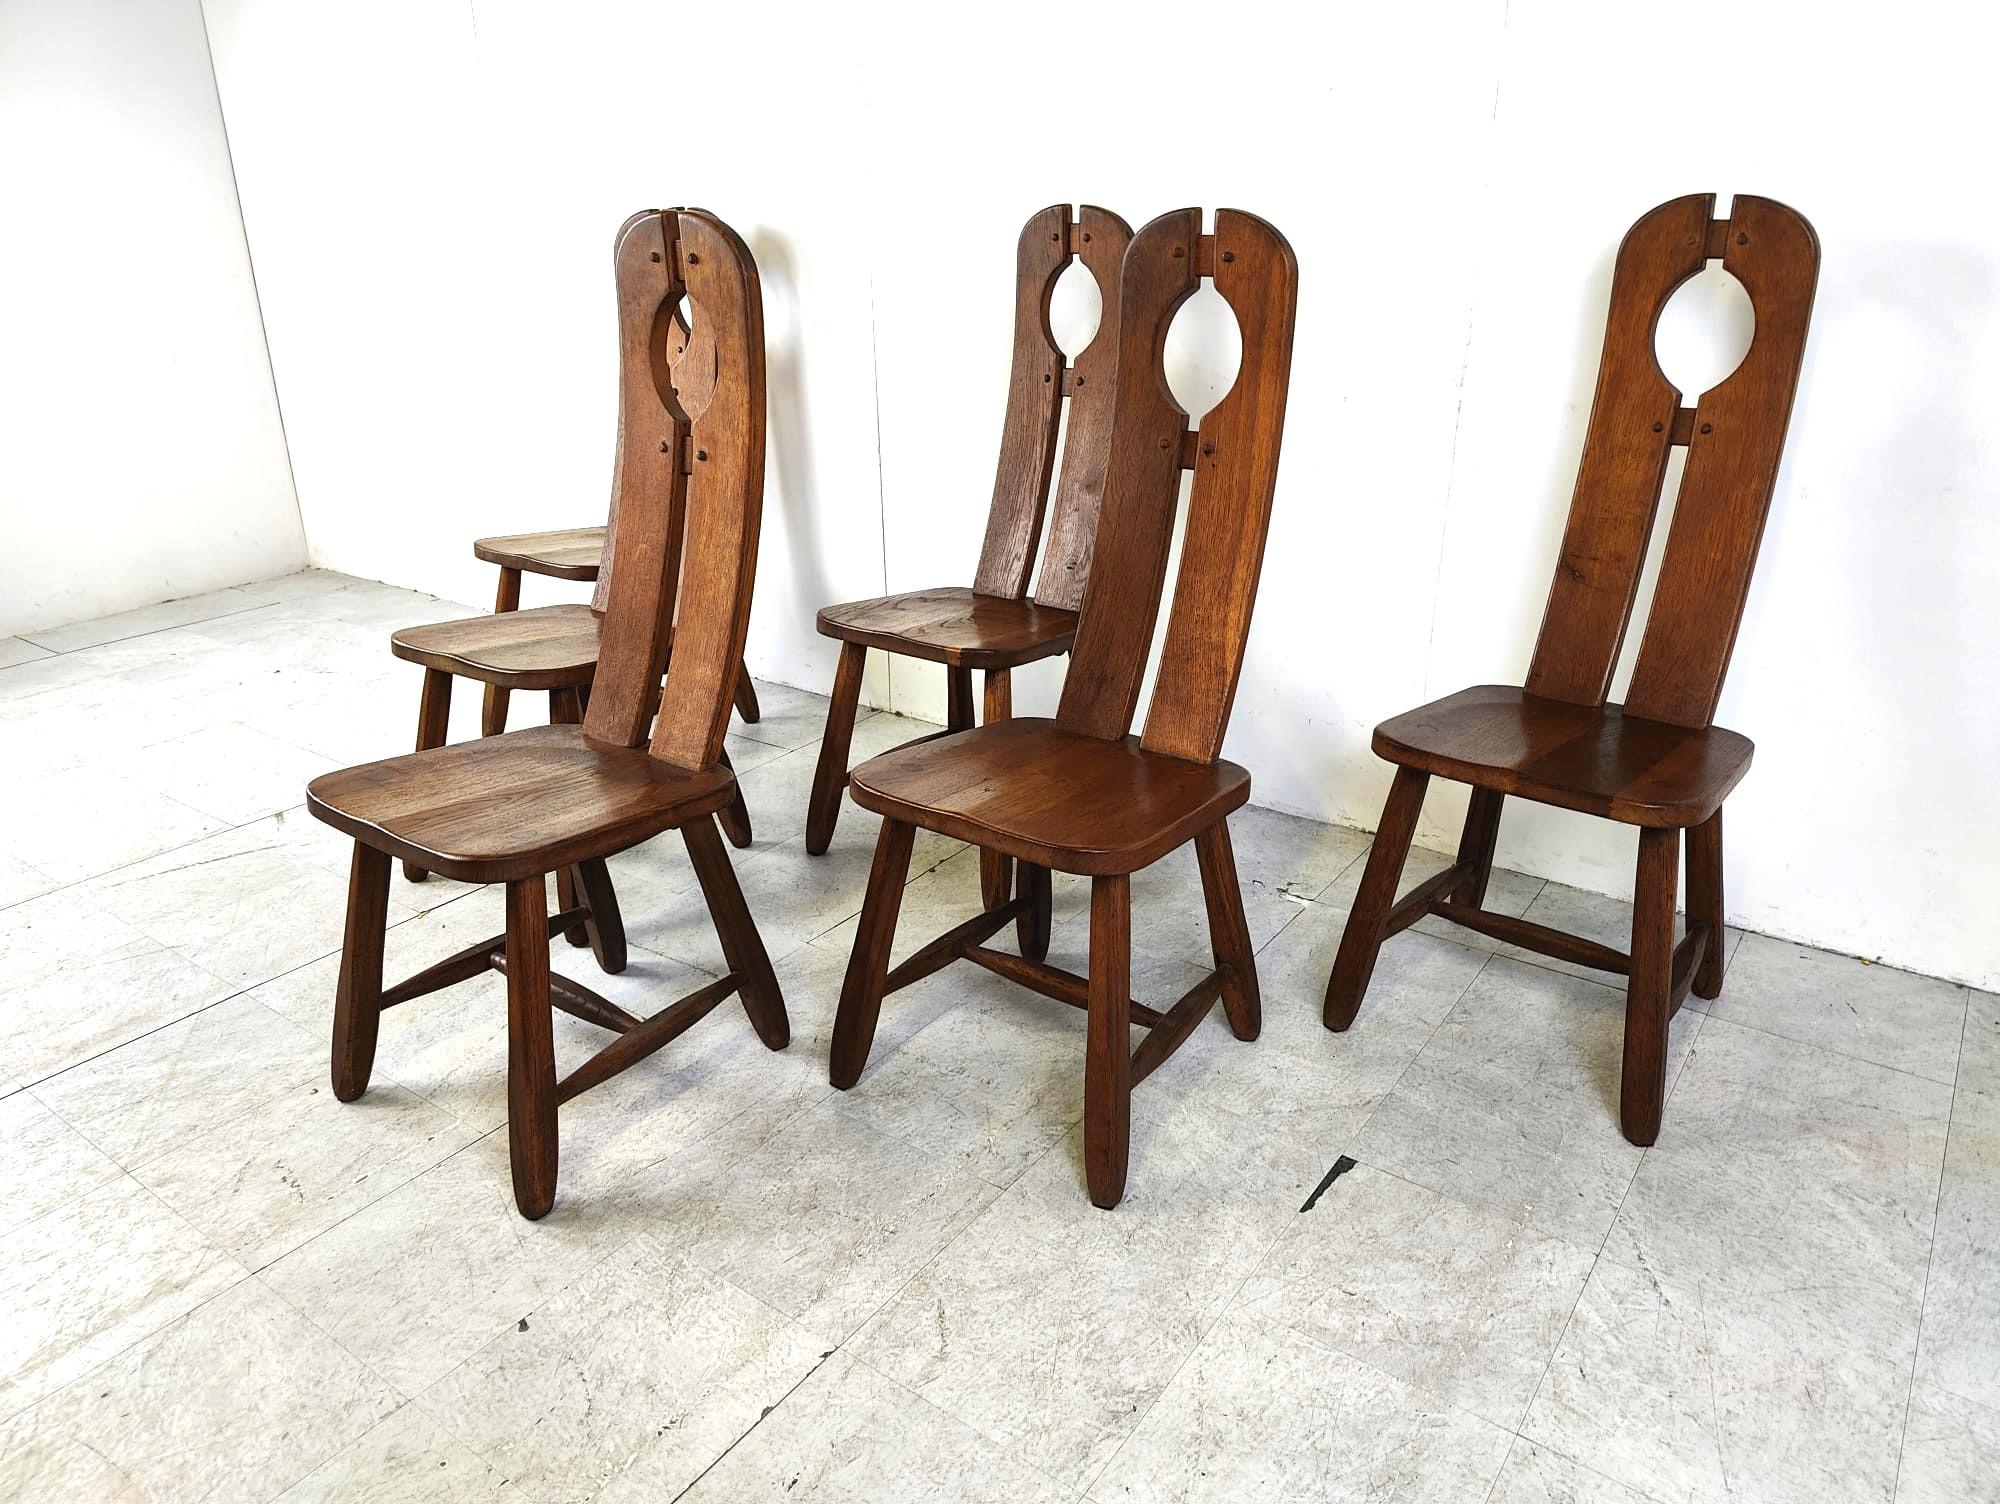 Vintage dining chairs by Depuydt, Belgium, set of 6 - 1960s For Sale 3